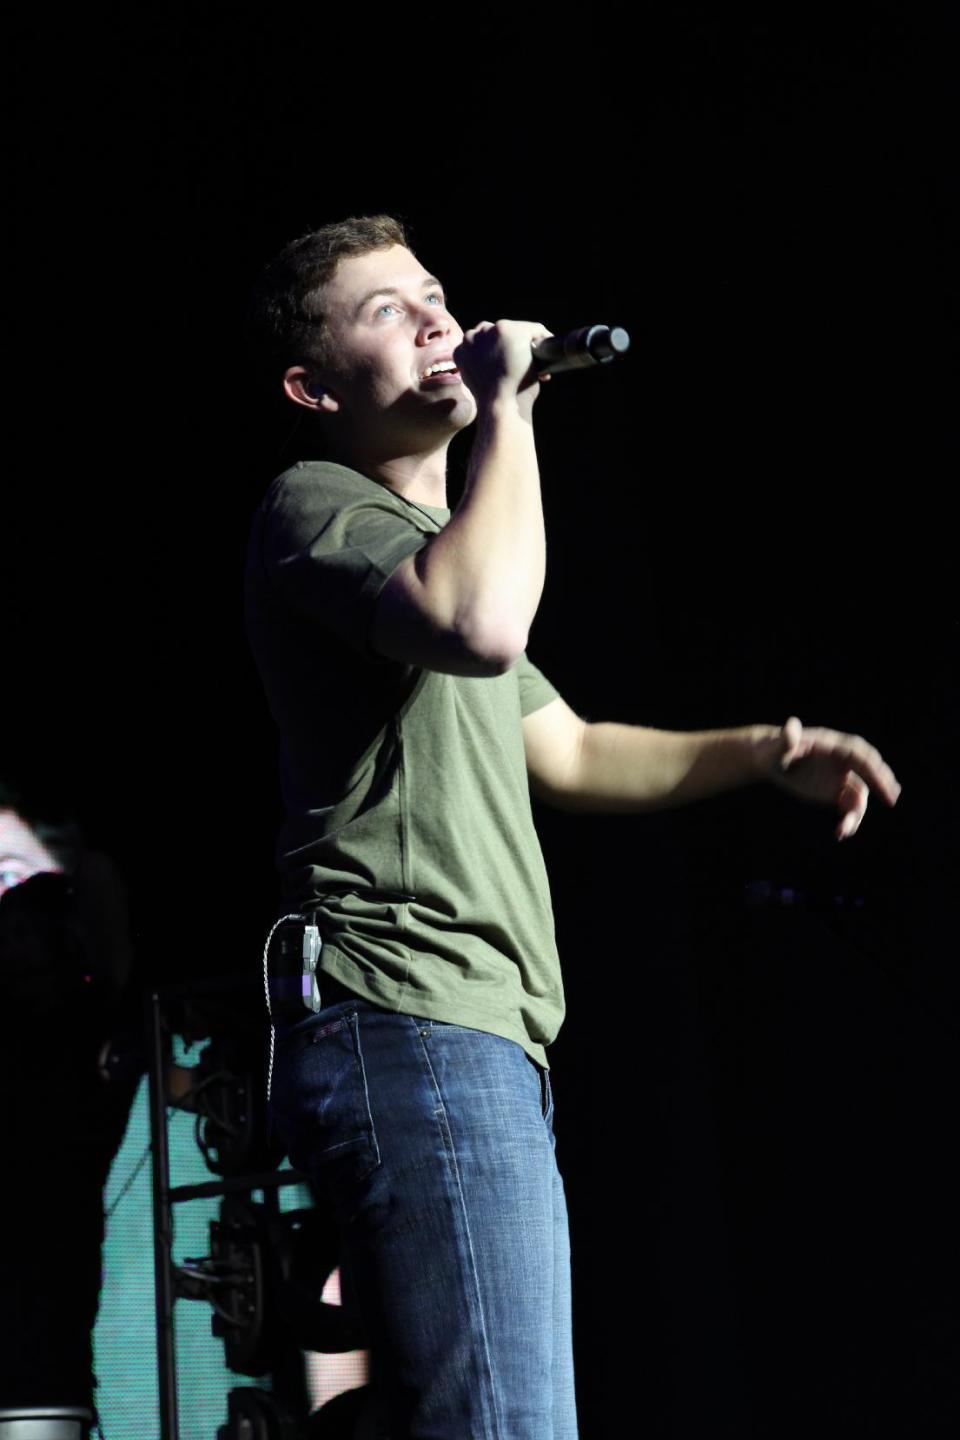 FILE - In this Sept. 15, 2012 file photo, Scotty McCreery performs at Aarons Amphitheater in Atlanta. McCreery rode a wave of success after winning the 2011 season of “American Idol,” with his first record going platinum and winning several new artist awards. But with his sophomore album, “See You Tonight,” McCreery says his career is now in his hands alone. (Photo by Robb Cohen/RobbsPhotos/Invision/AP, File)